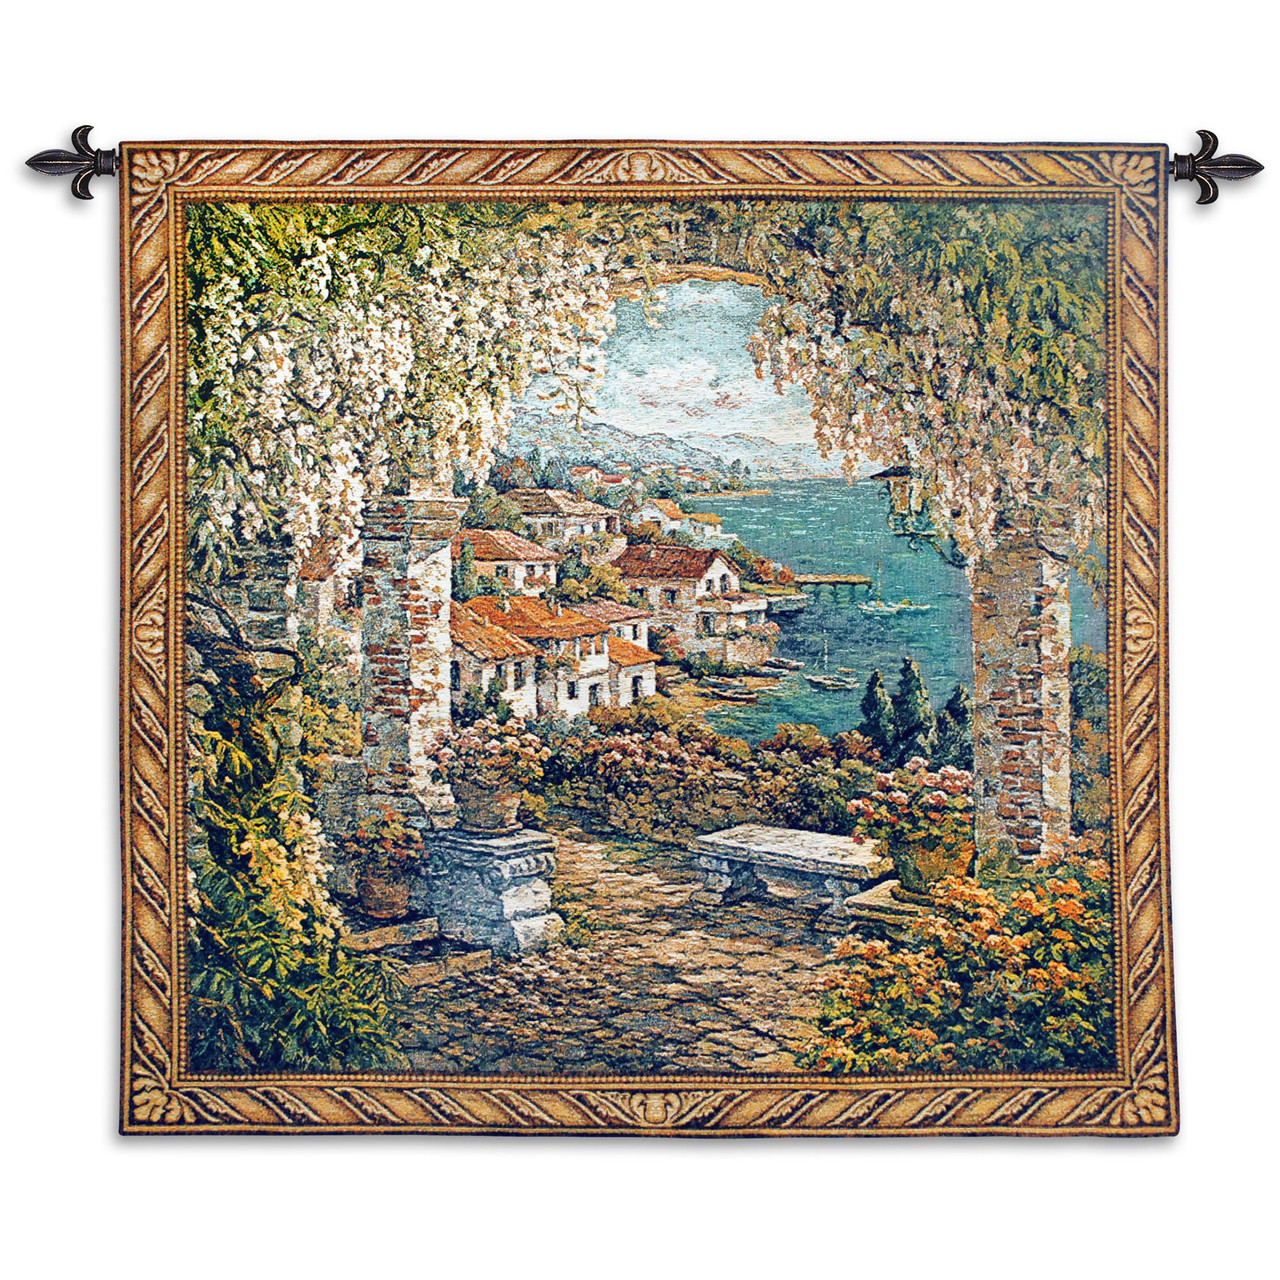 Seaview Hideaway by Yurie Lee Woven Tapestry Wall Art Hanging  Mediterranean Garden Seaside View 100% Cotton USA Size 53x53